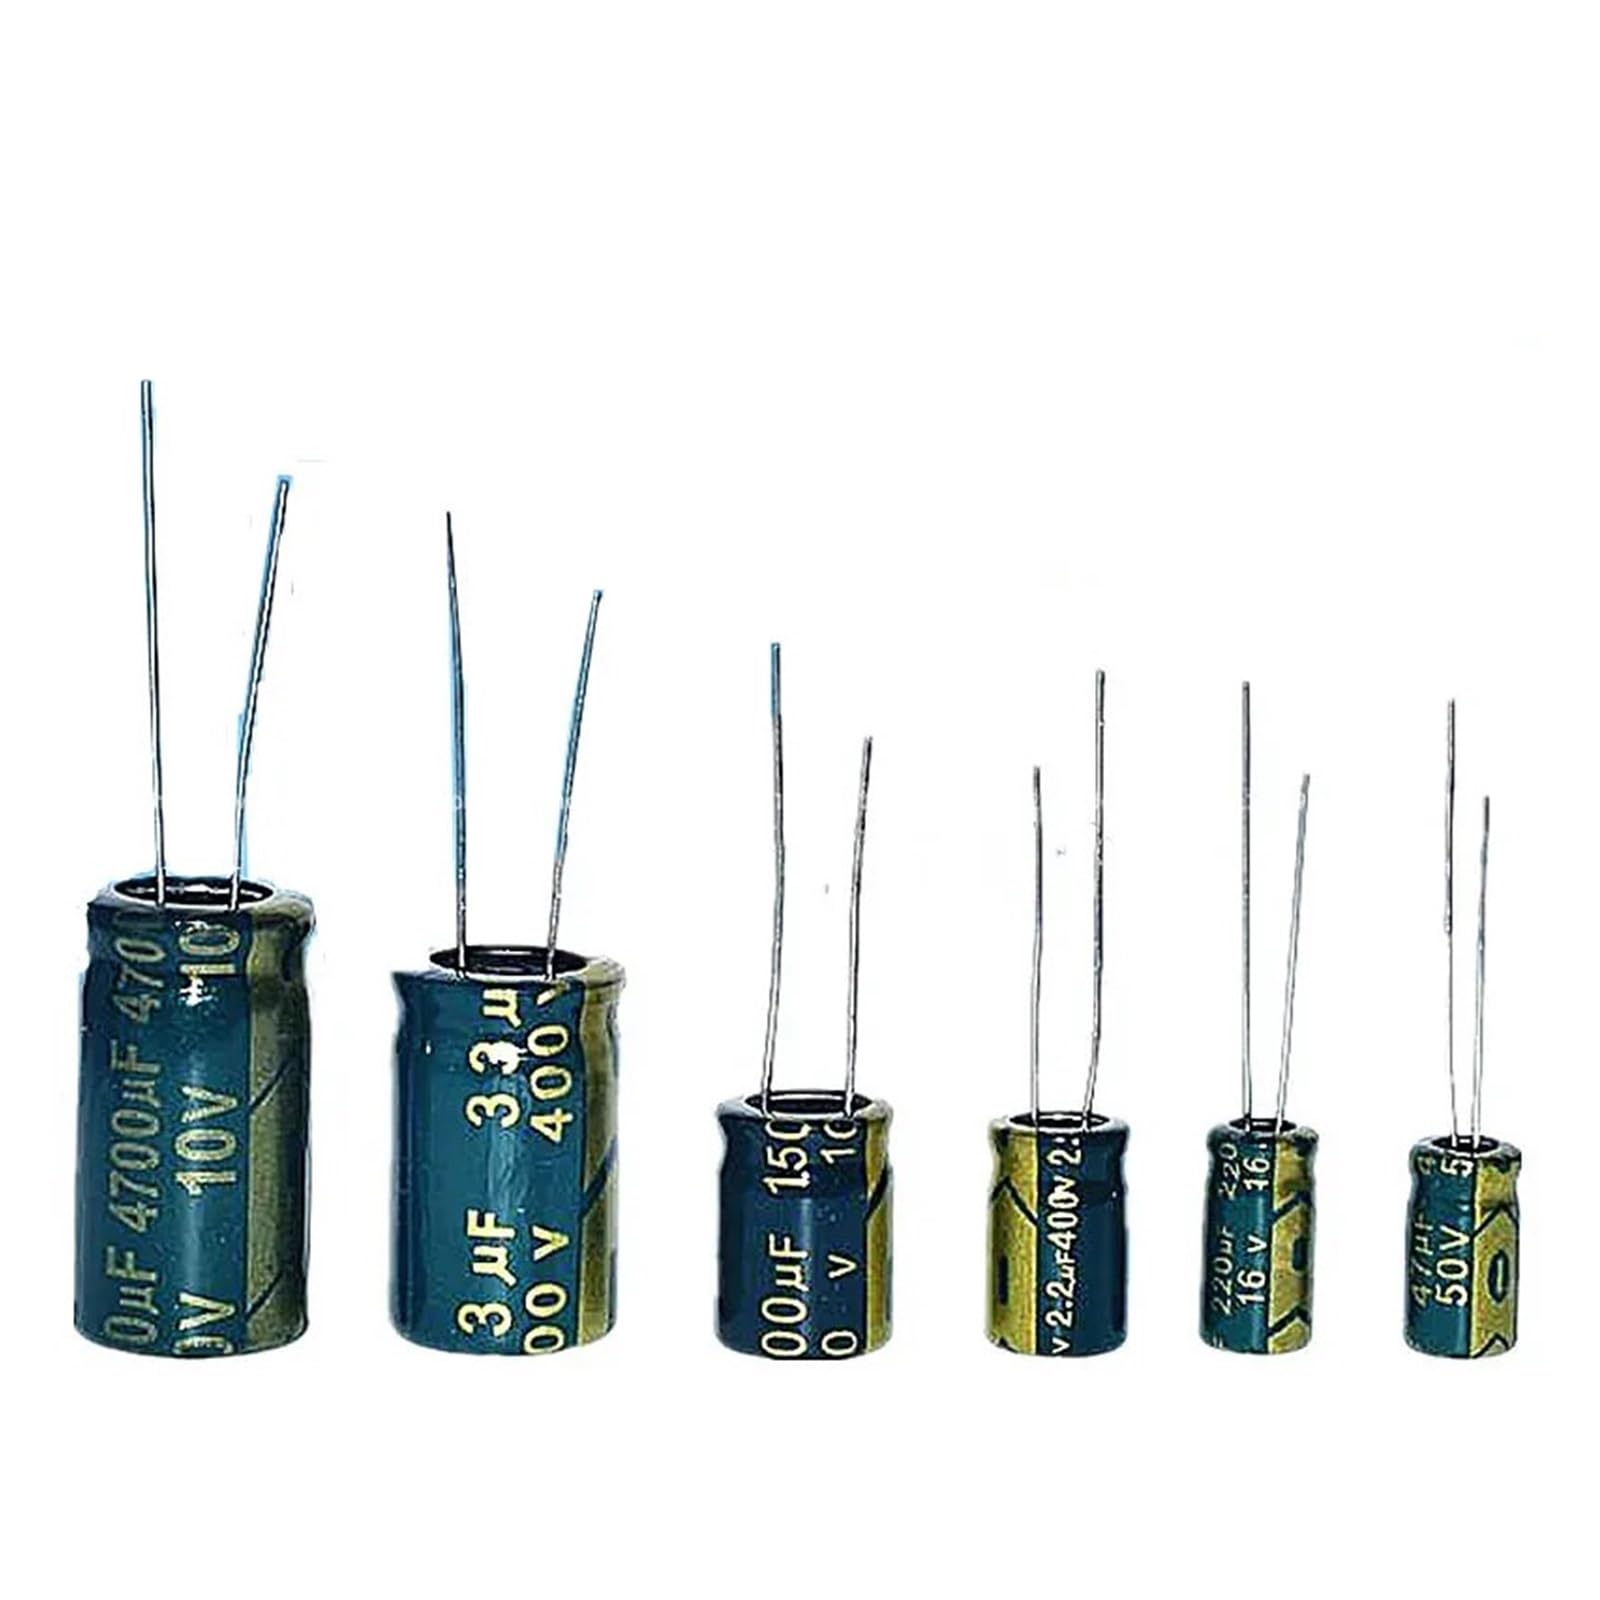 HOROJDTH High Frequency Low Aluminum Electrolytic Capacitor 100V 10UF 47UF 68UF 100UF 150UF 220UF 330UF 470UF 680UF 1000UF 2200UF (100V2200UF 2PCS) von HOROJDTH